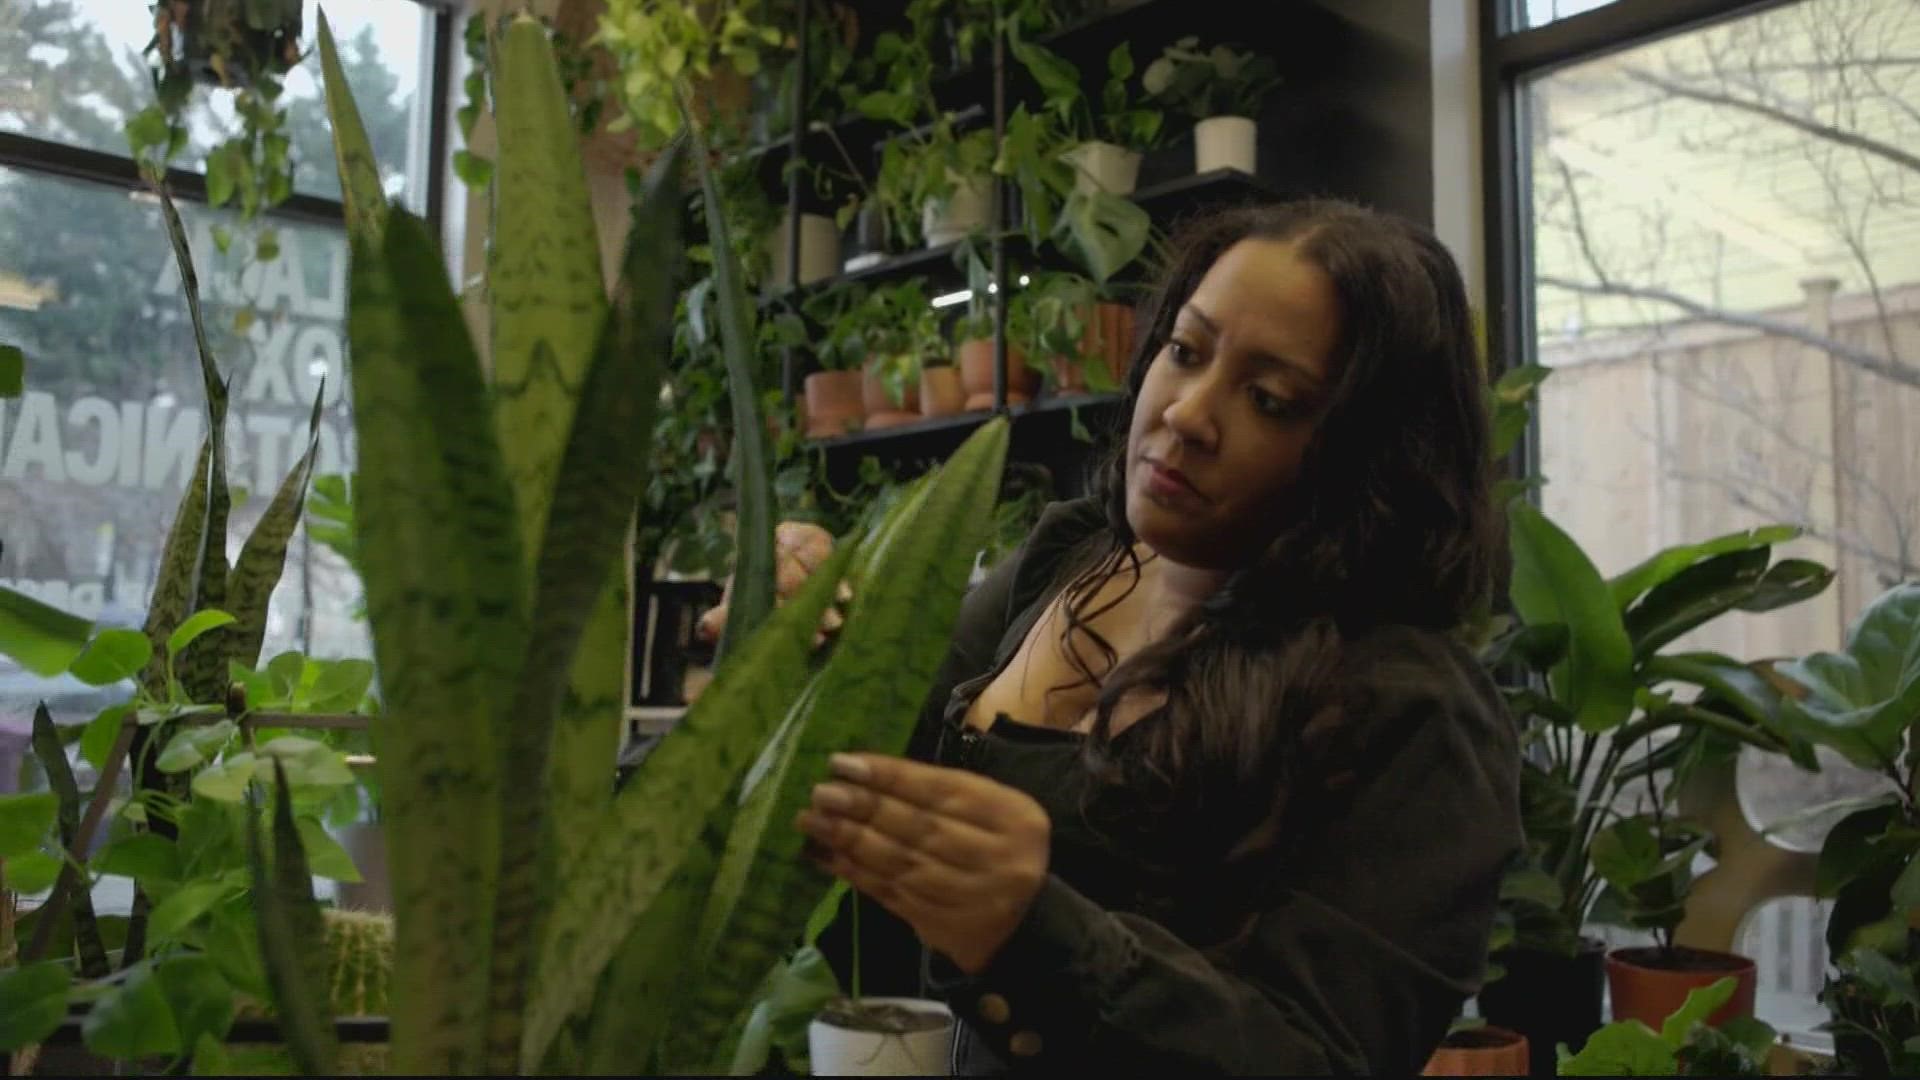 Meterologist Kaitlyn McGrath talked to some plant-care experts in DC who gave some advice on keeping your houseplants happy in the DMV through the winter.